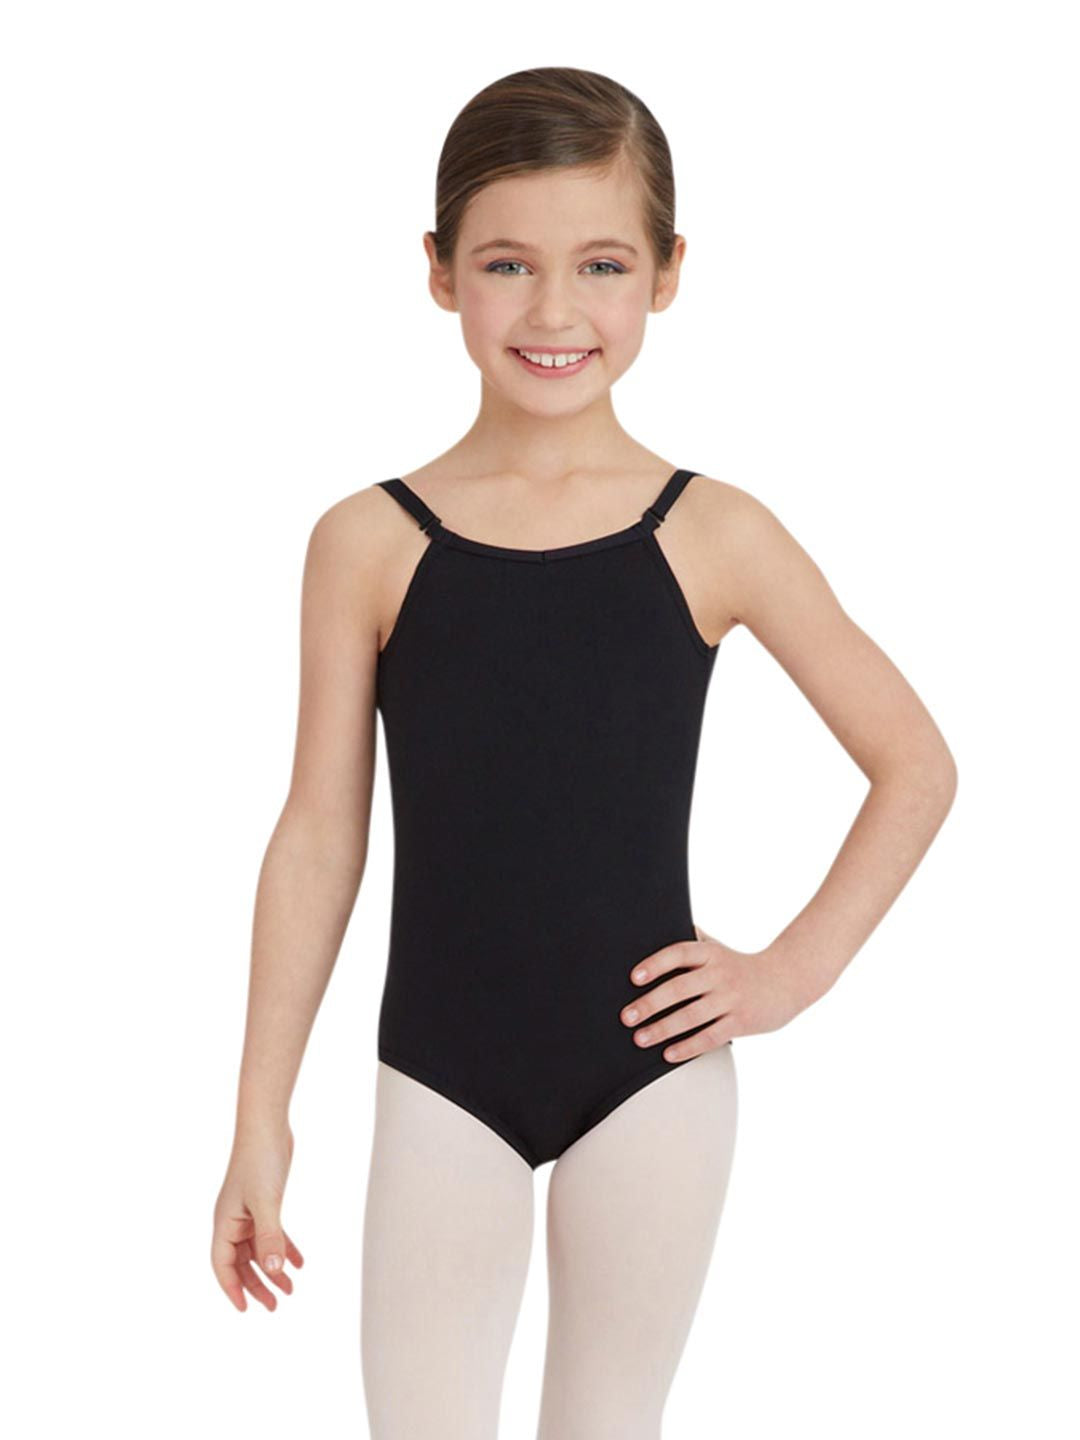 Youth Camisole Leotards